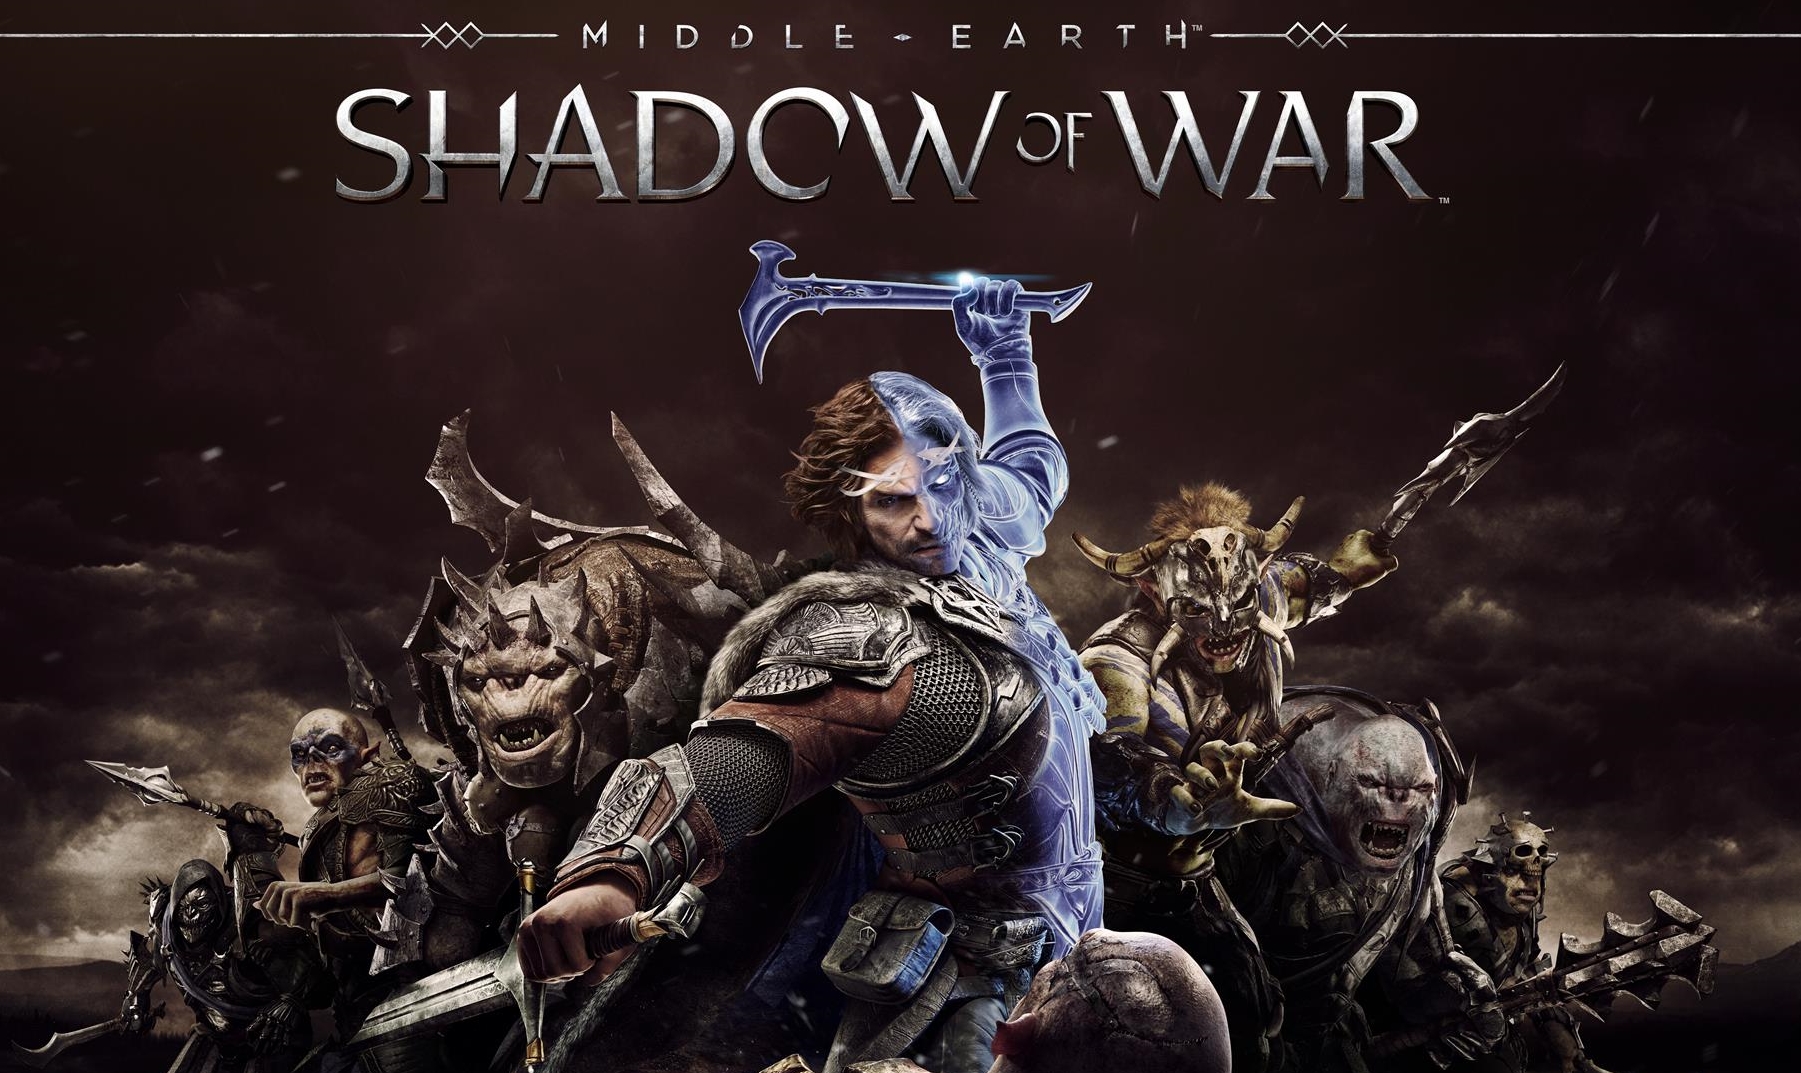 Middle-earth: Shadow Of War #21